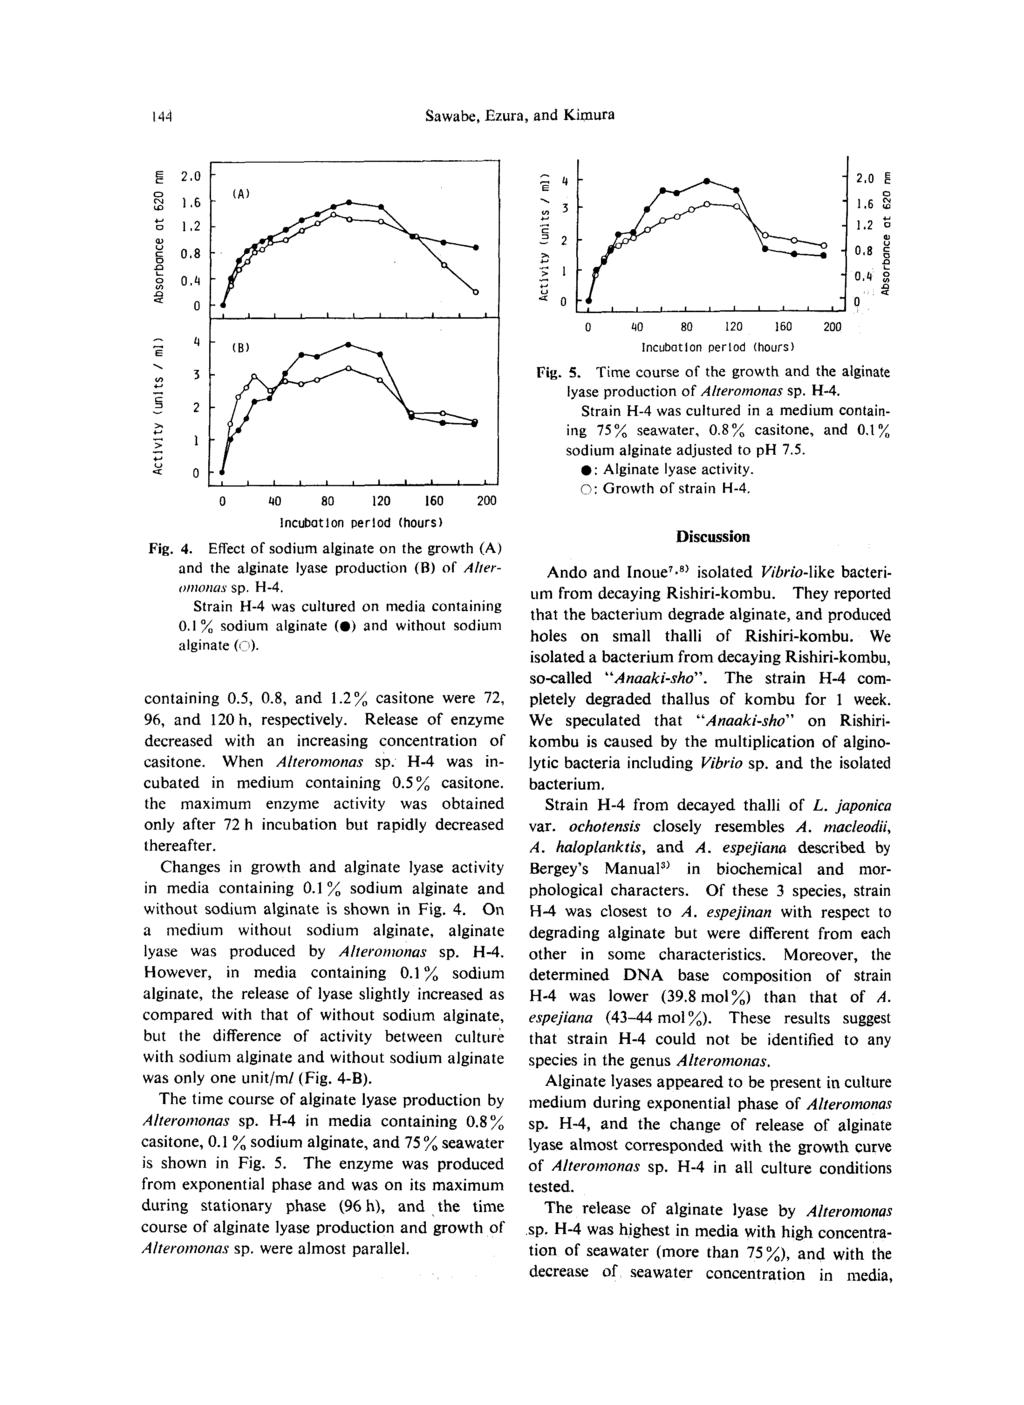 Fig. 5. Time course of the growth and the alginate l yase production of Alteromonas sp. H-4. Strain H-4 was cultured in a medium containing 75% seawater, 0.8% casitone, and 0.